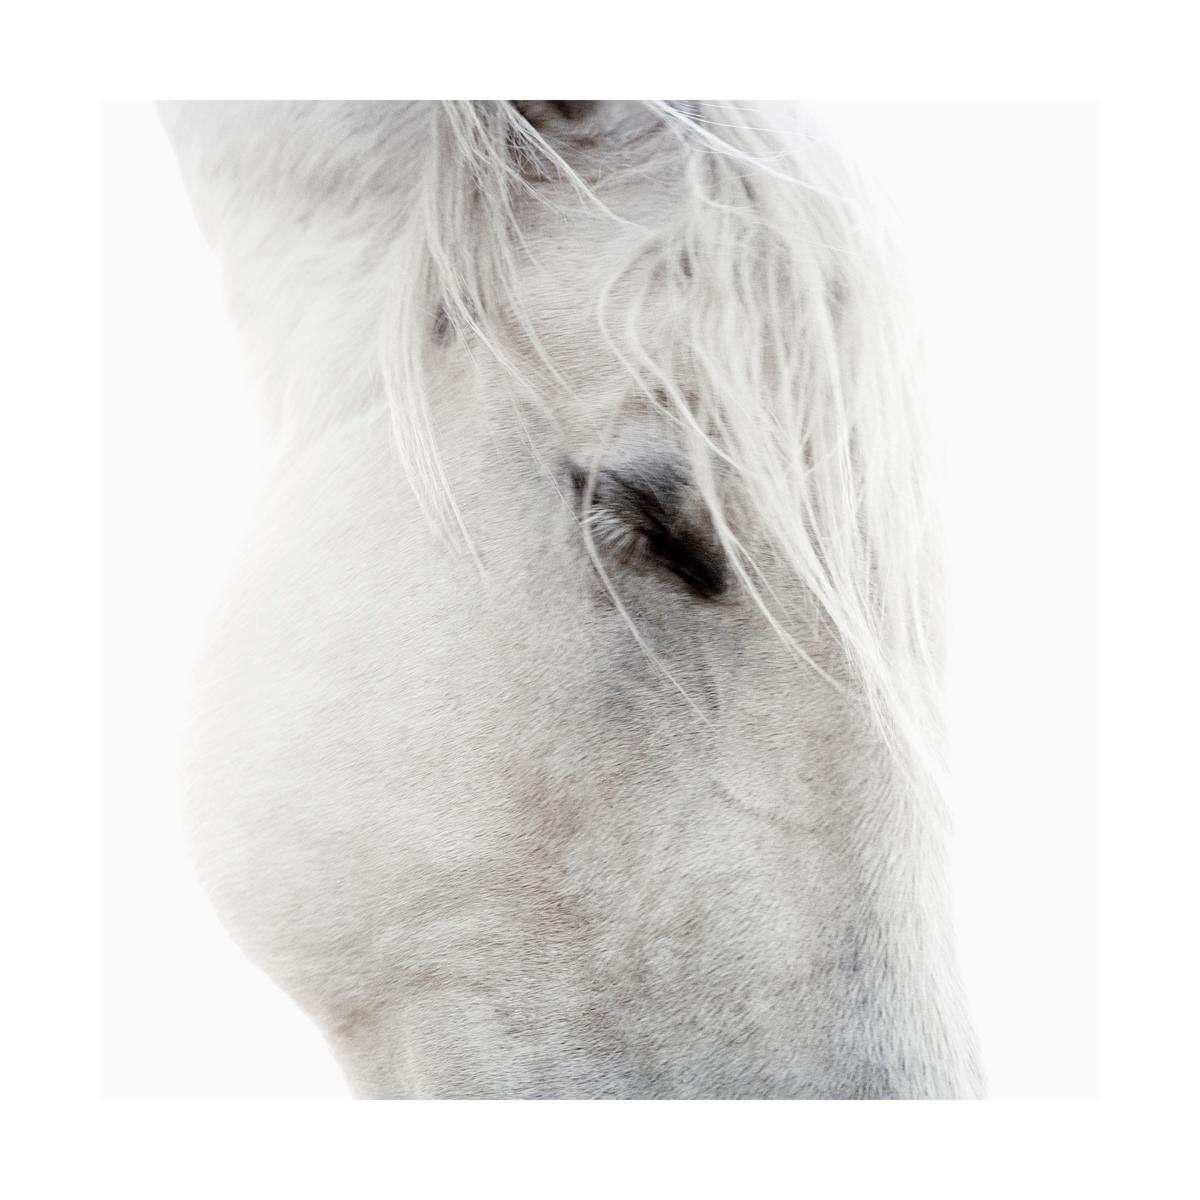 Selected from Phillip's acclaimed series, The Horses of Deep Hollow Ranch. Working with a vintage Mamiya handed to him by a stranger in NYC, Graybill creates contemporary photographic compositions in a style that is reminiscent of the Pictorial